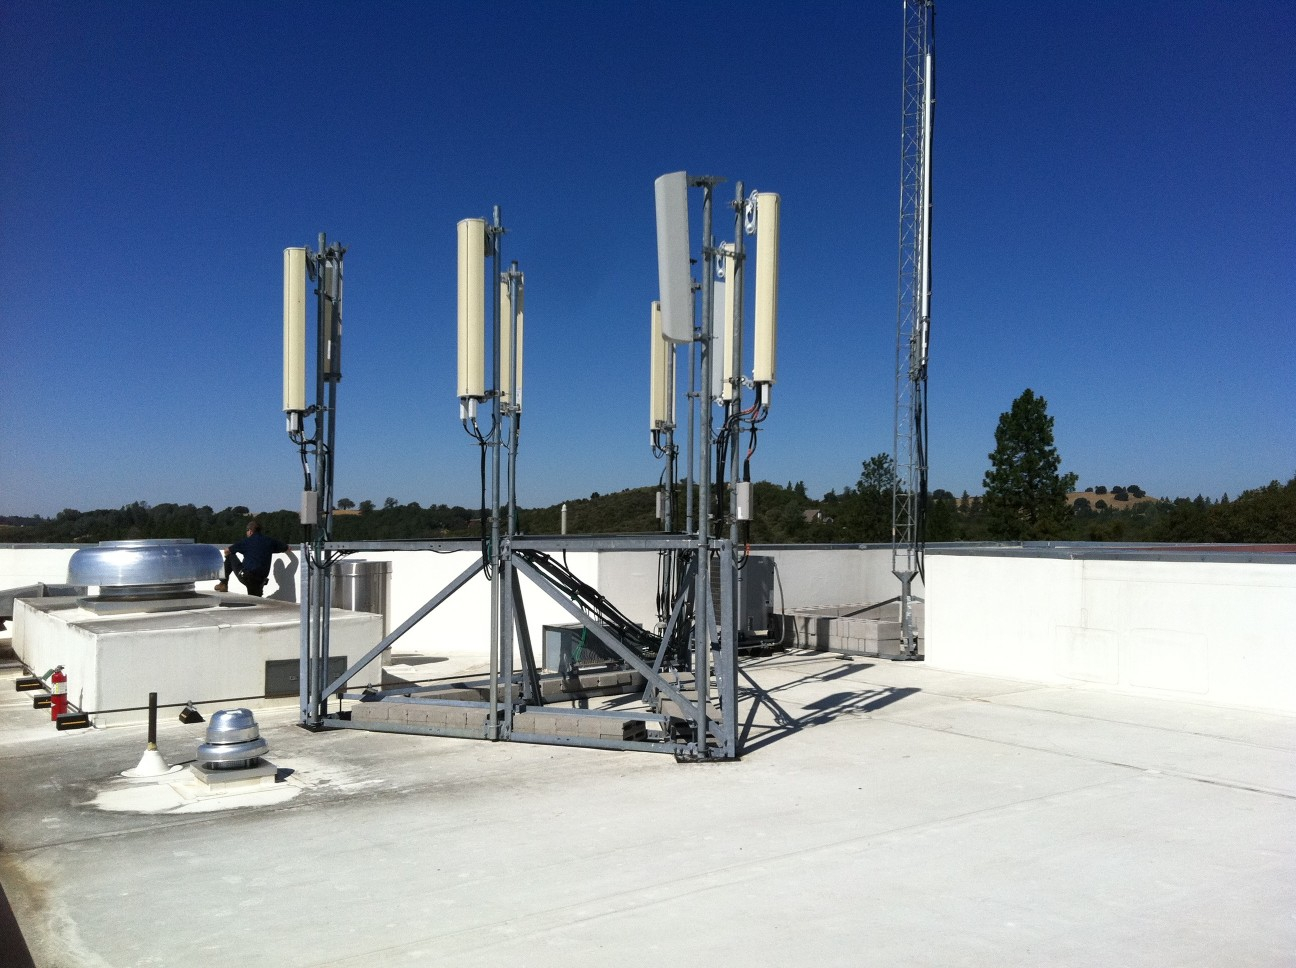 Mobile Tower Lease Agreement Cell Tower Lease Buyout Experts Who Turn Cell Tower Leases Into Gold